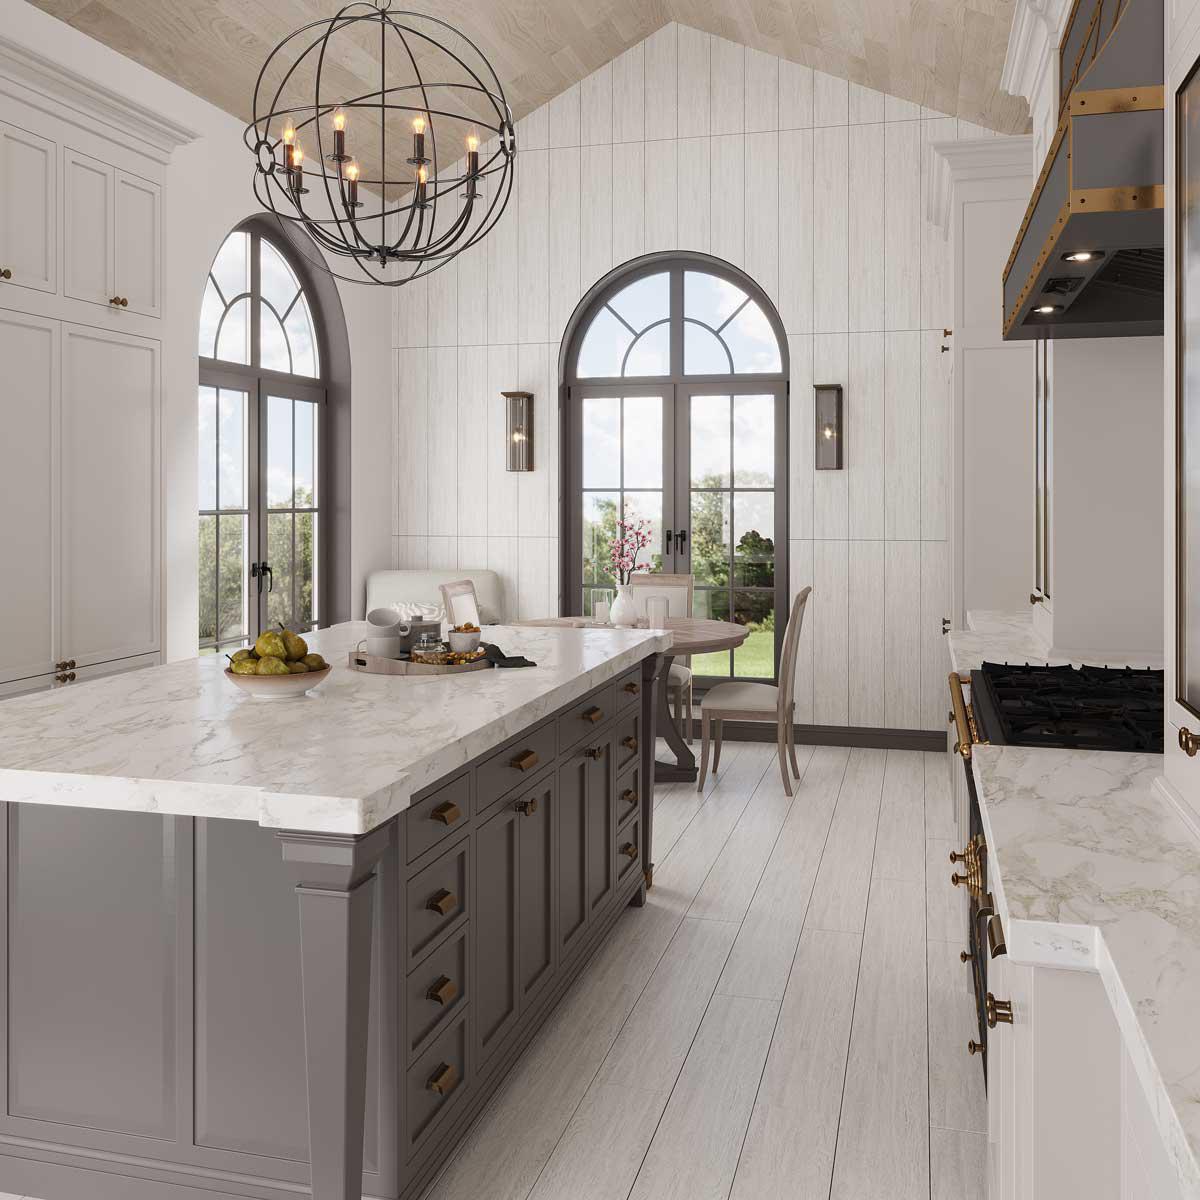 White farmhouse kitchen with wood-look wall and floor tiles